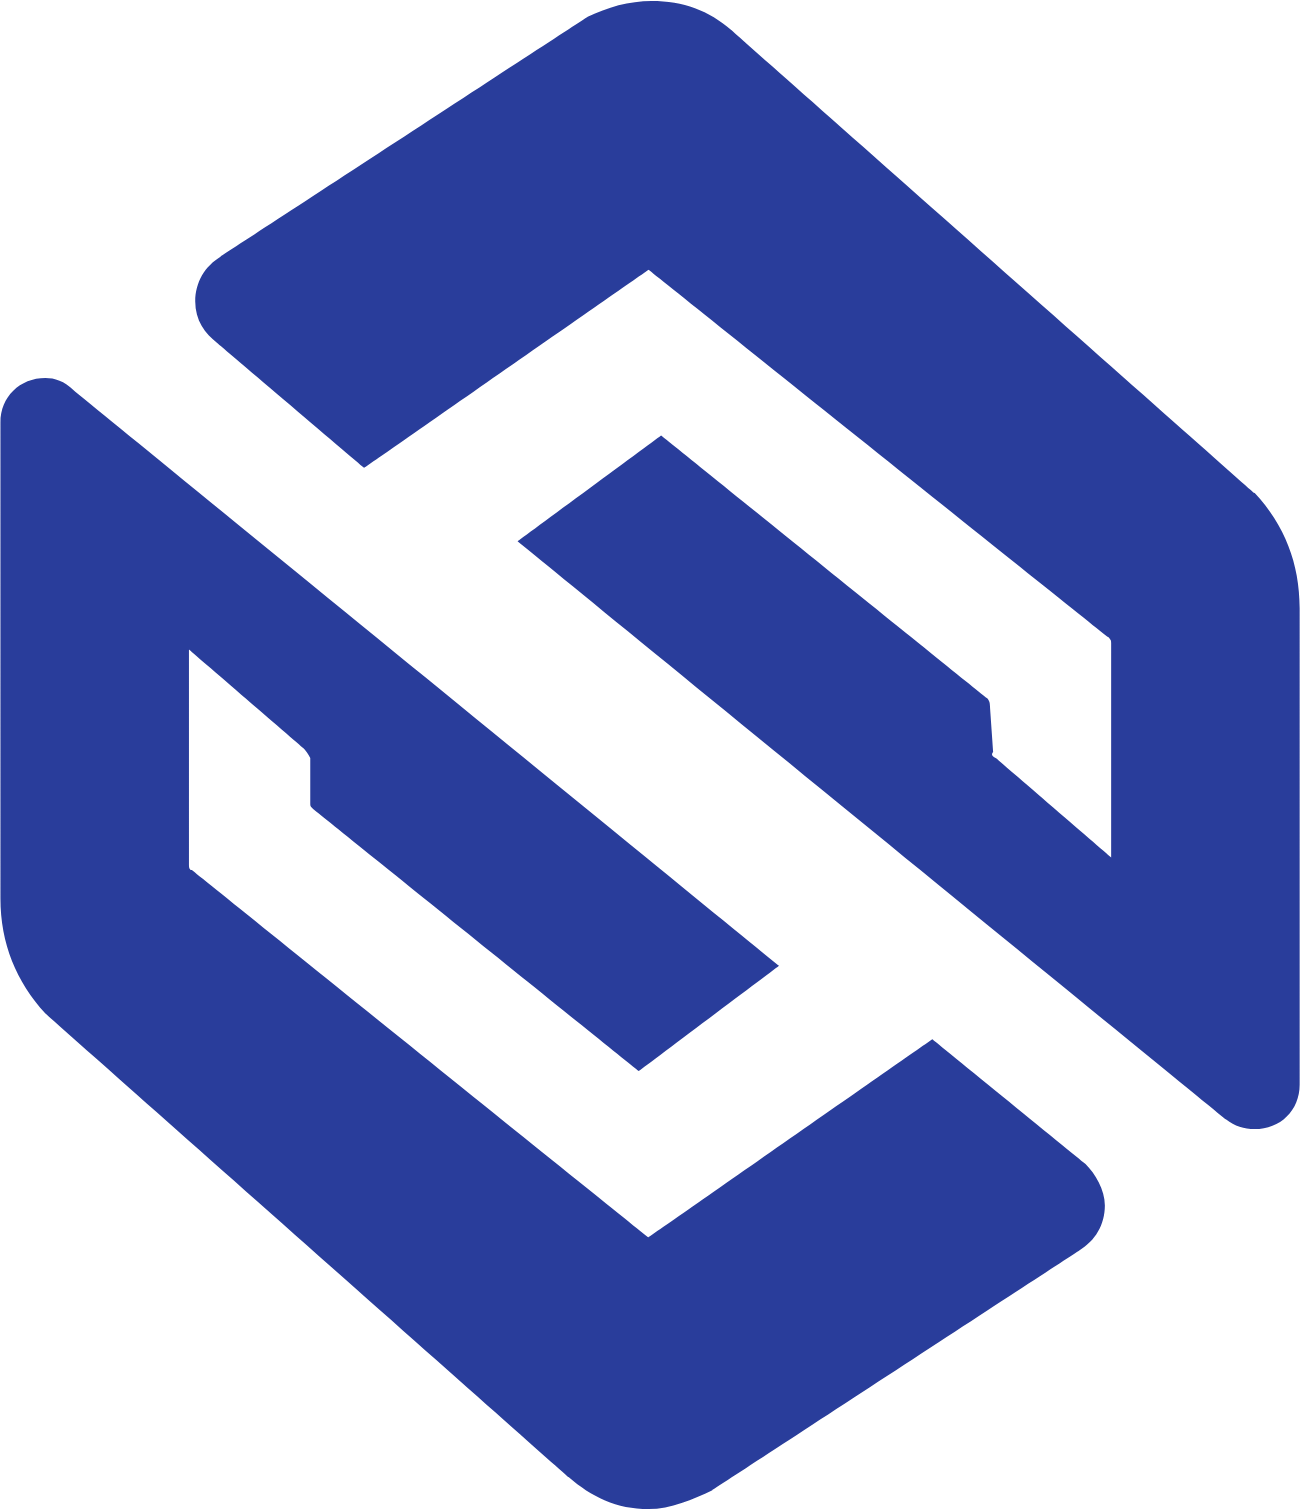 Sarcos Technology Robotics logo in transparent PNG and vectorized formats